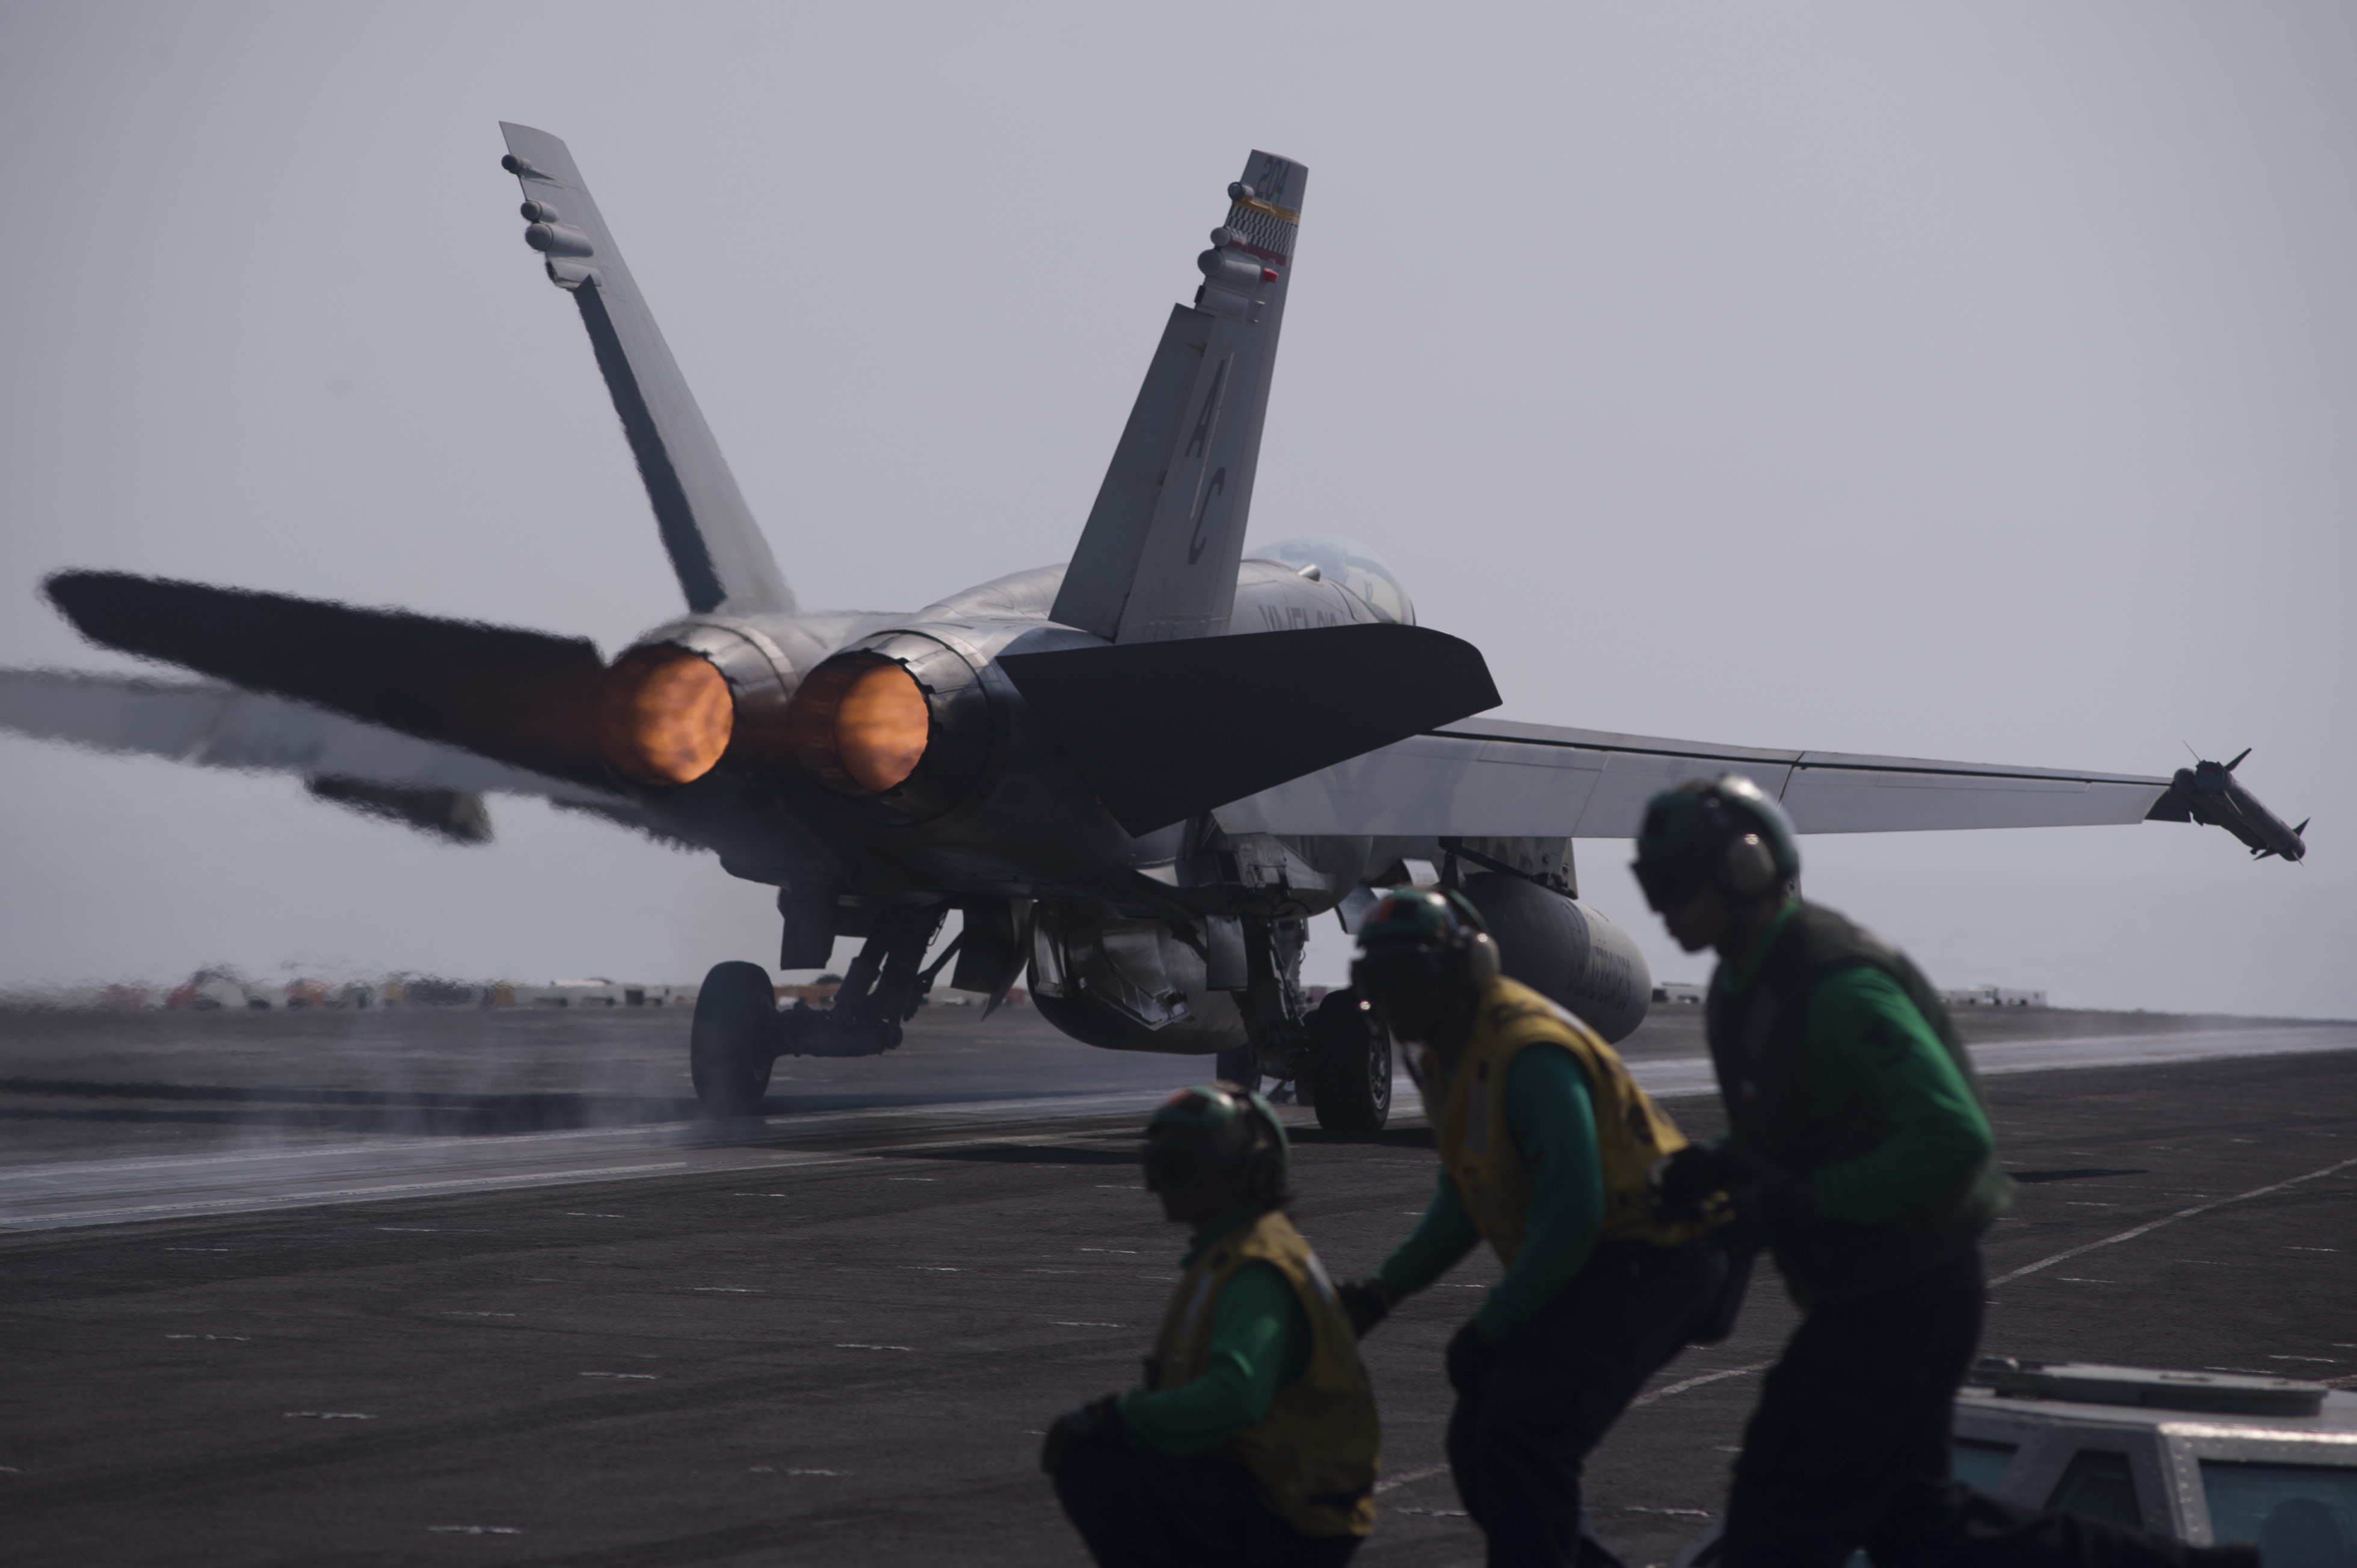 An F/A-18C Hornet, assigned to the Checkerboards of Marine Fighter Attack Squadron (VMA) 312, launches from the flight deck of the aircraft carrier USS Harry S. Truman (CVN-75) on Oct. 13, 2014. US Navy Photo